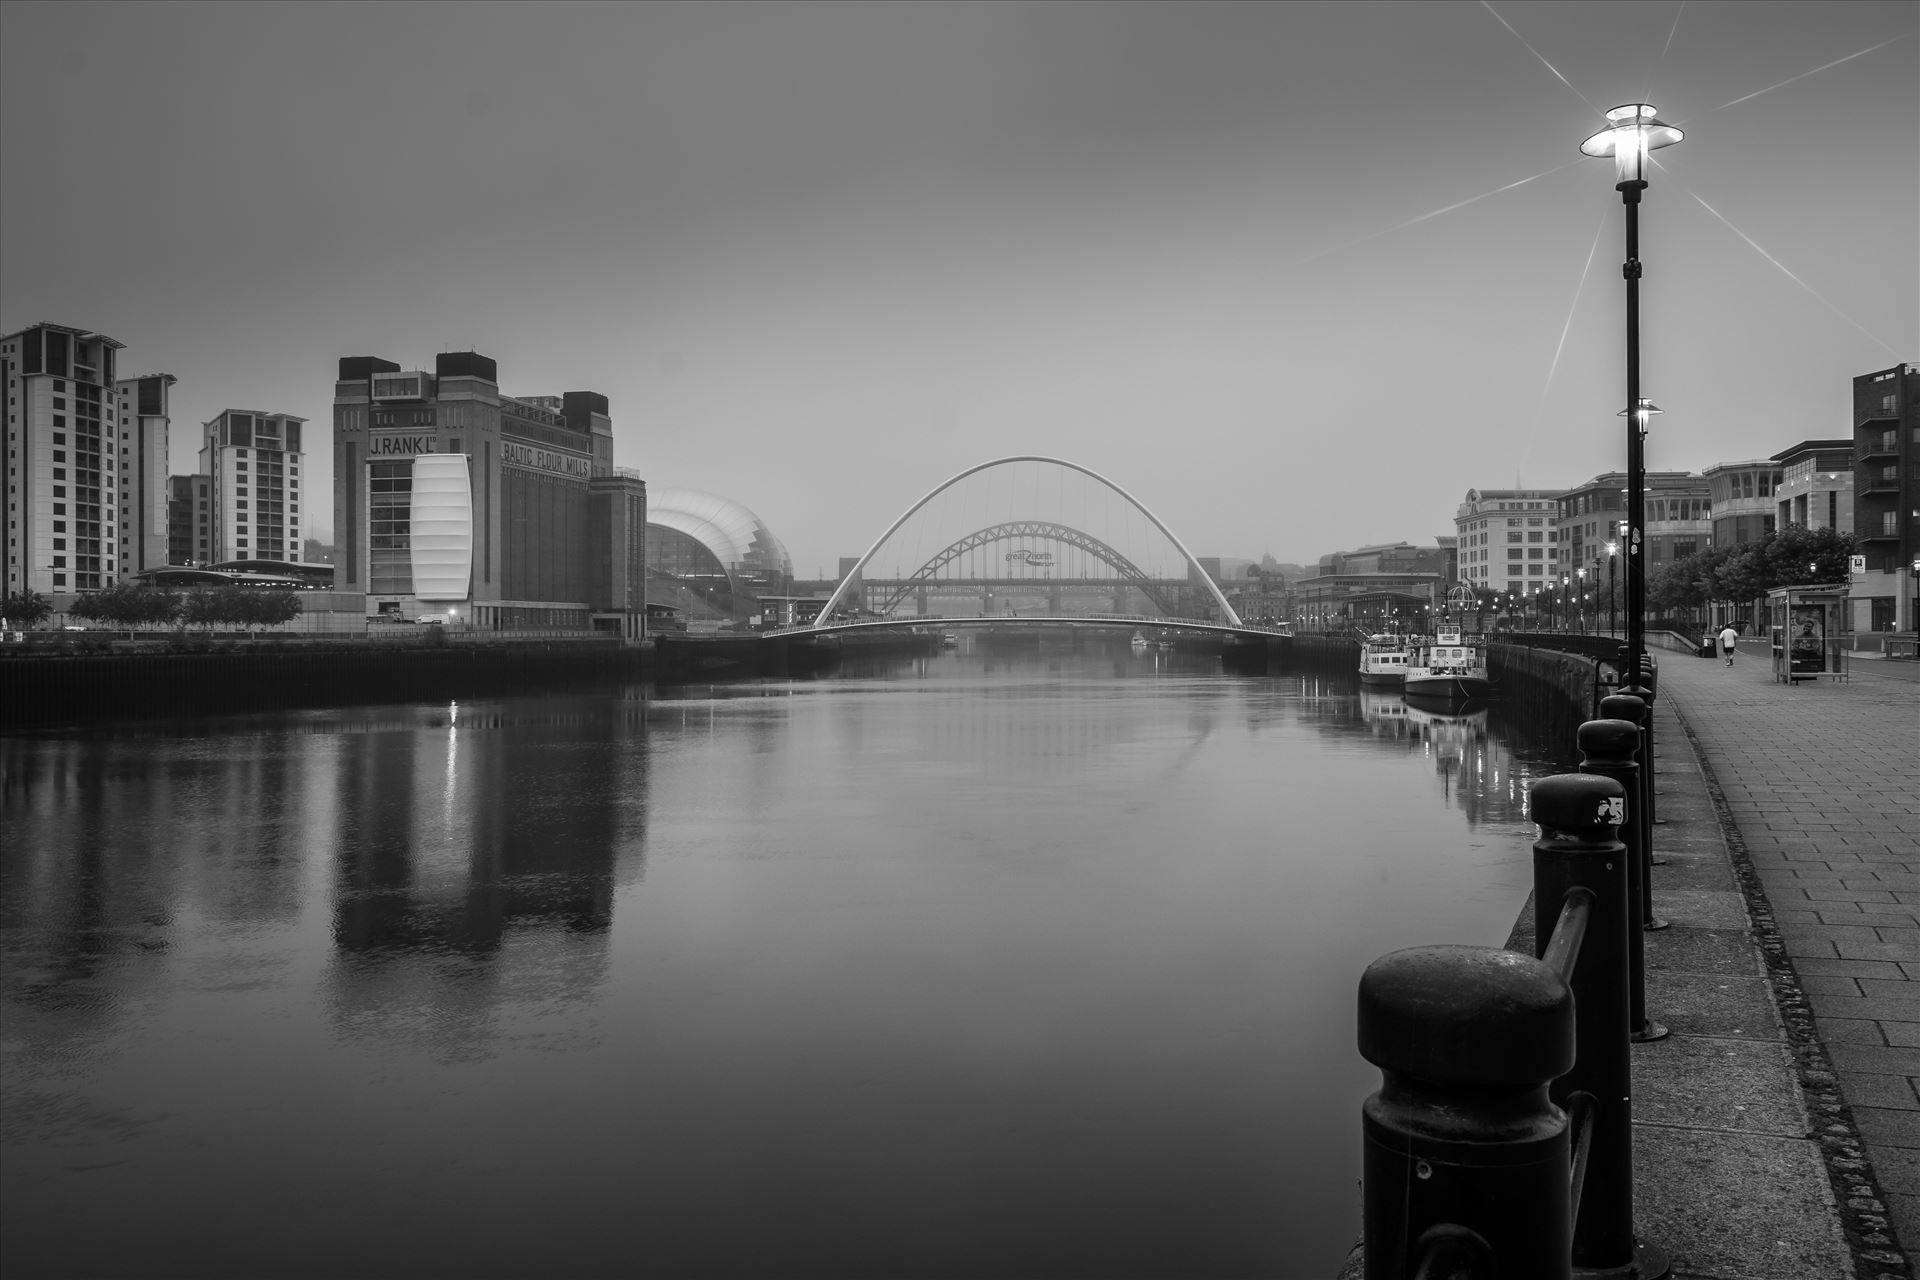 Newcastle/Gateshead Quayside - The River Tyne taken from Newcastle quayside by philreay